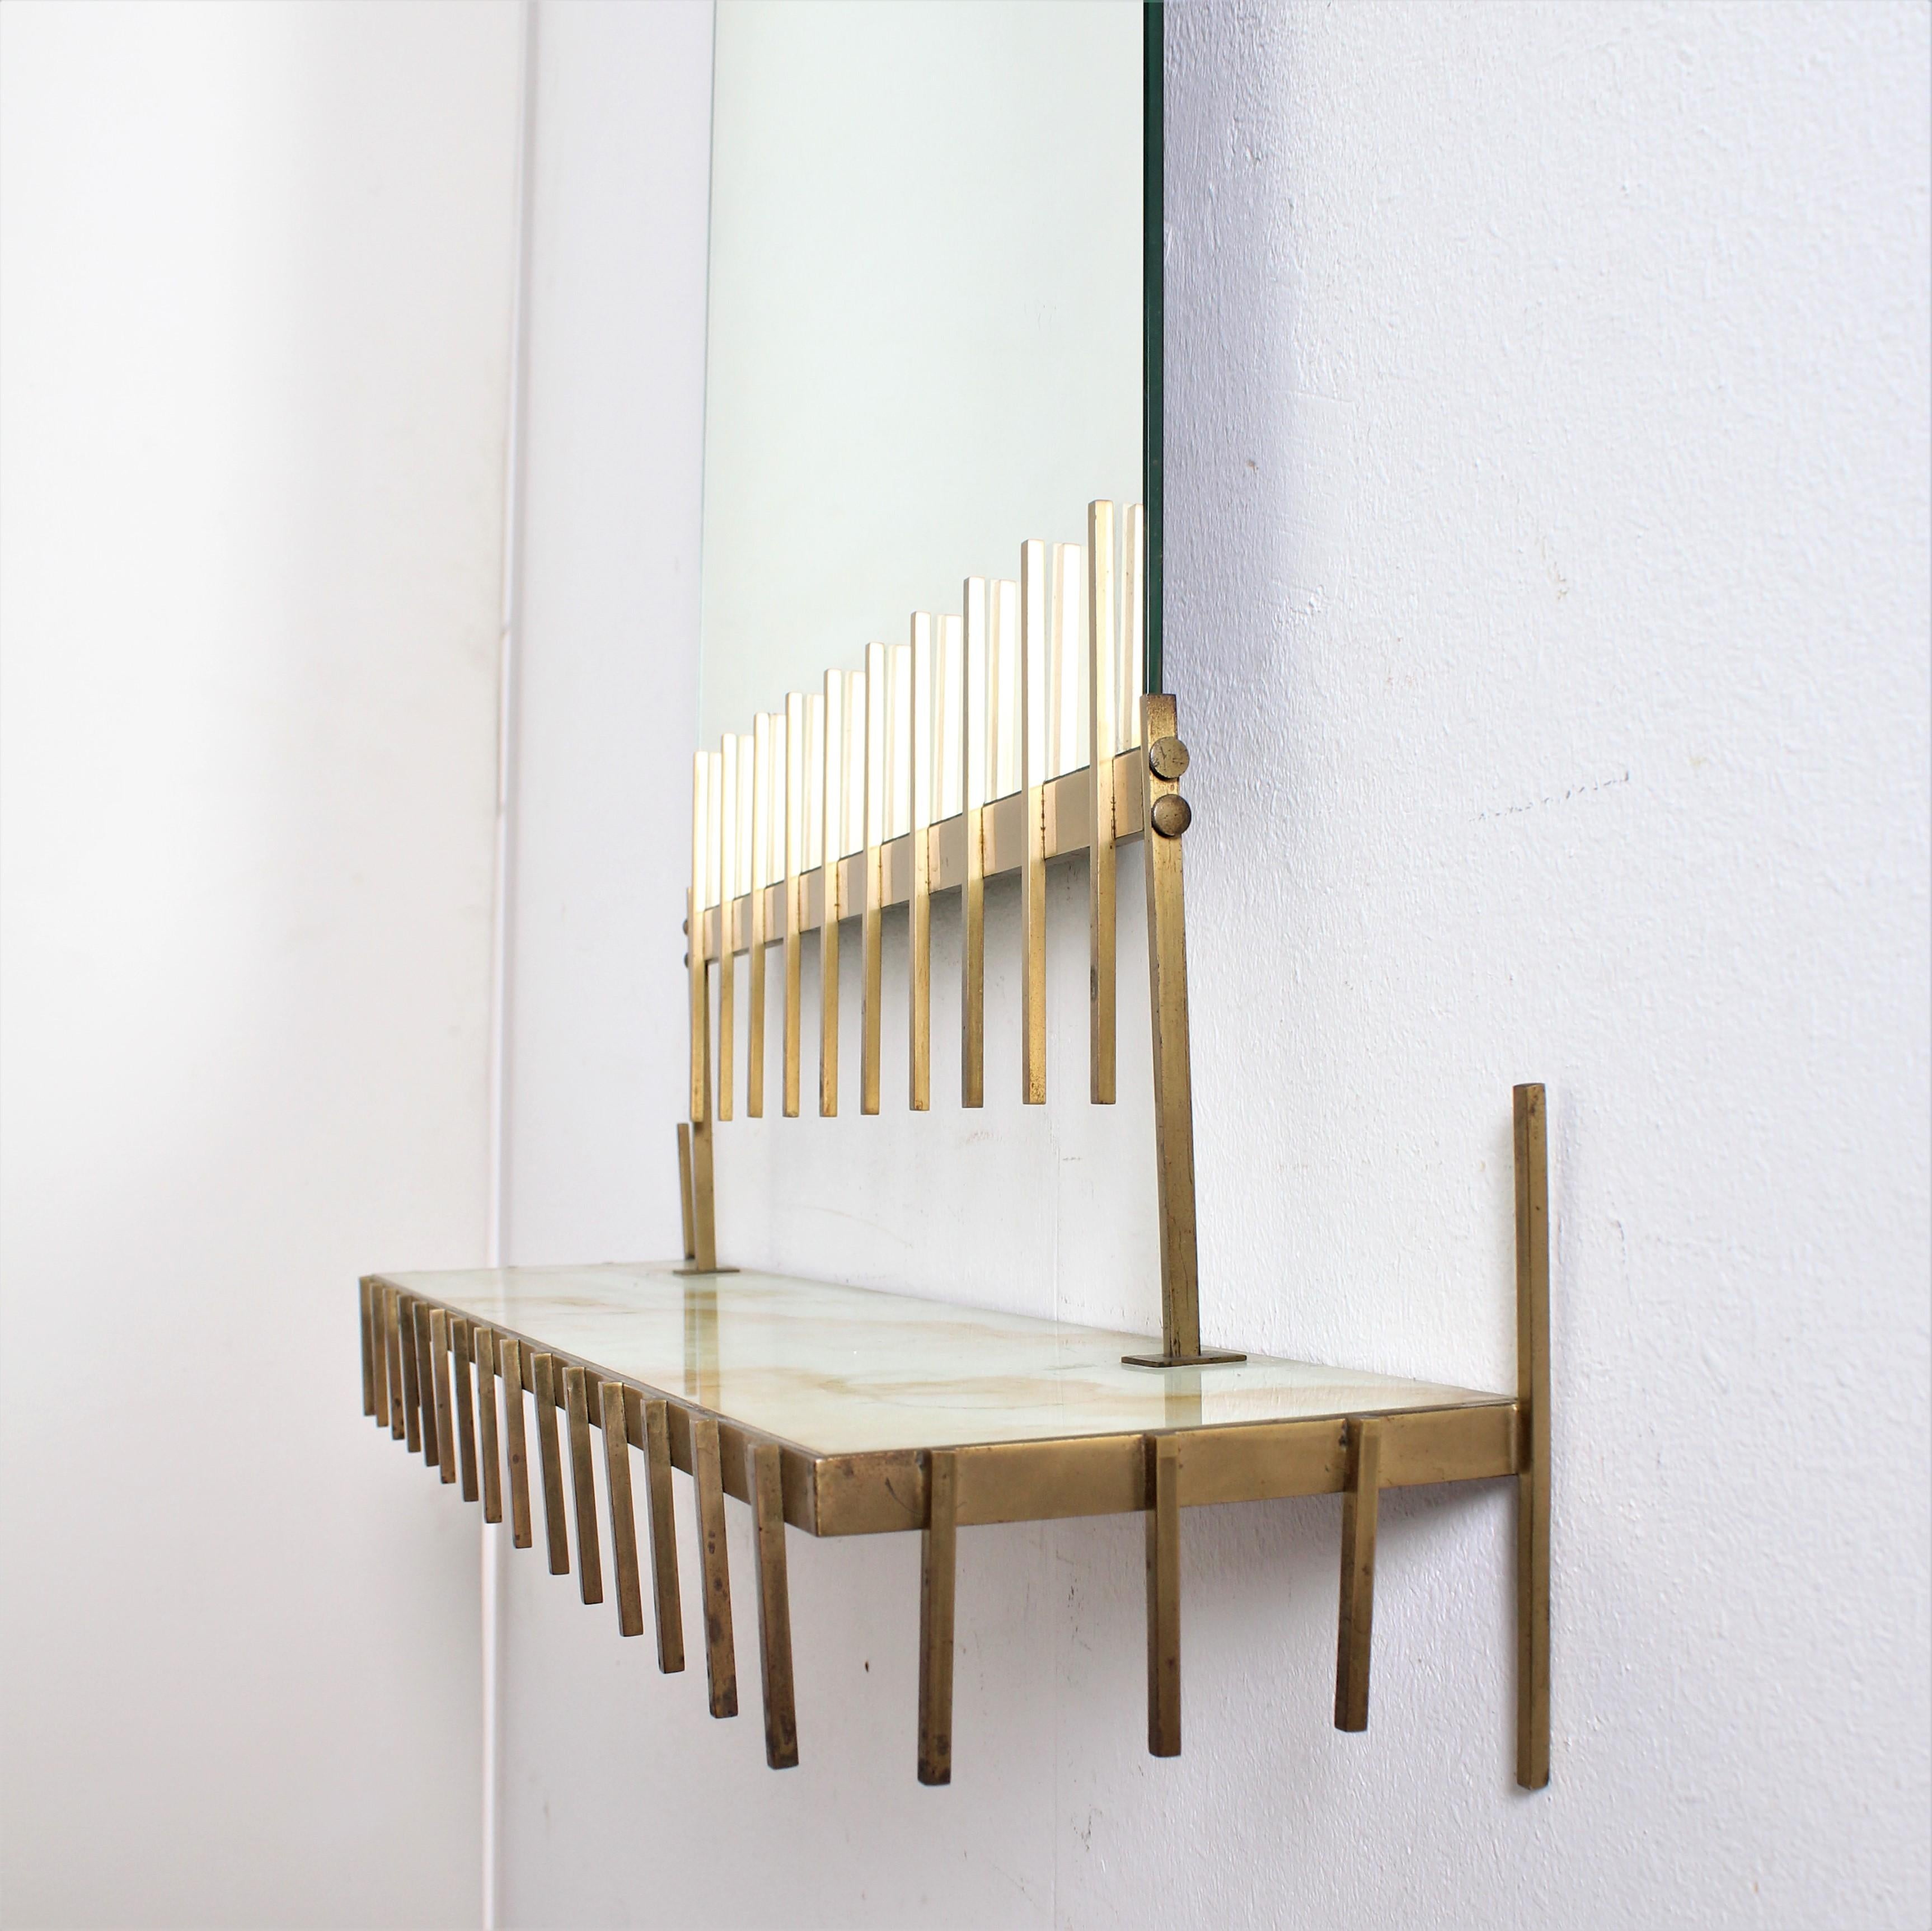 Midcentury Brass and Marbled Glass Mirror Console by Ettore Sottsass, Italy (Mitte des 20. Jahrhunderts)